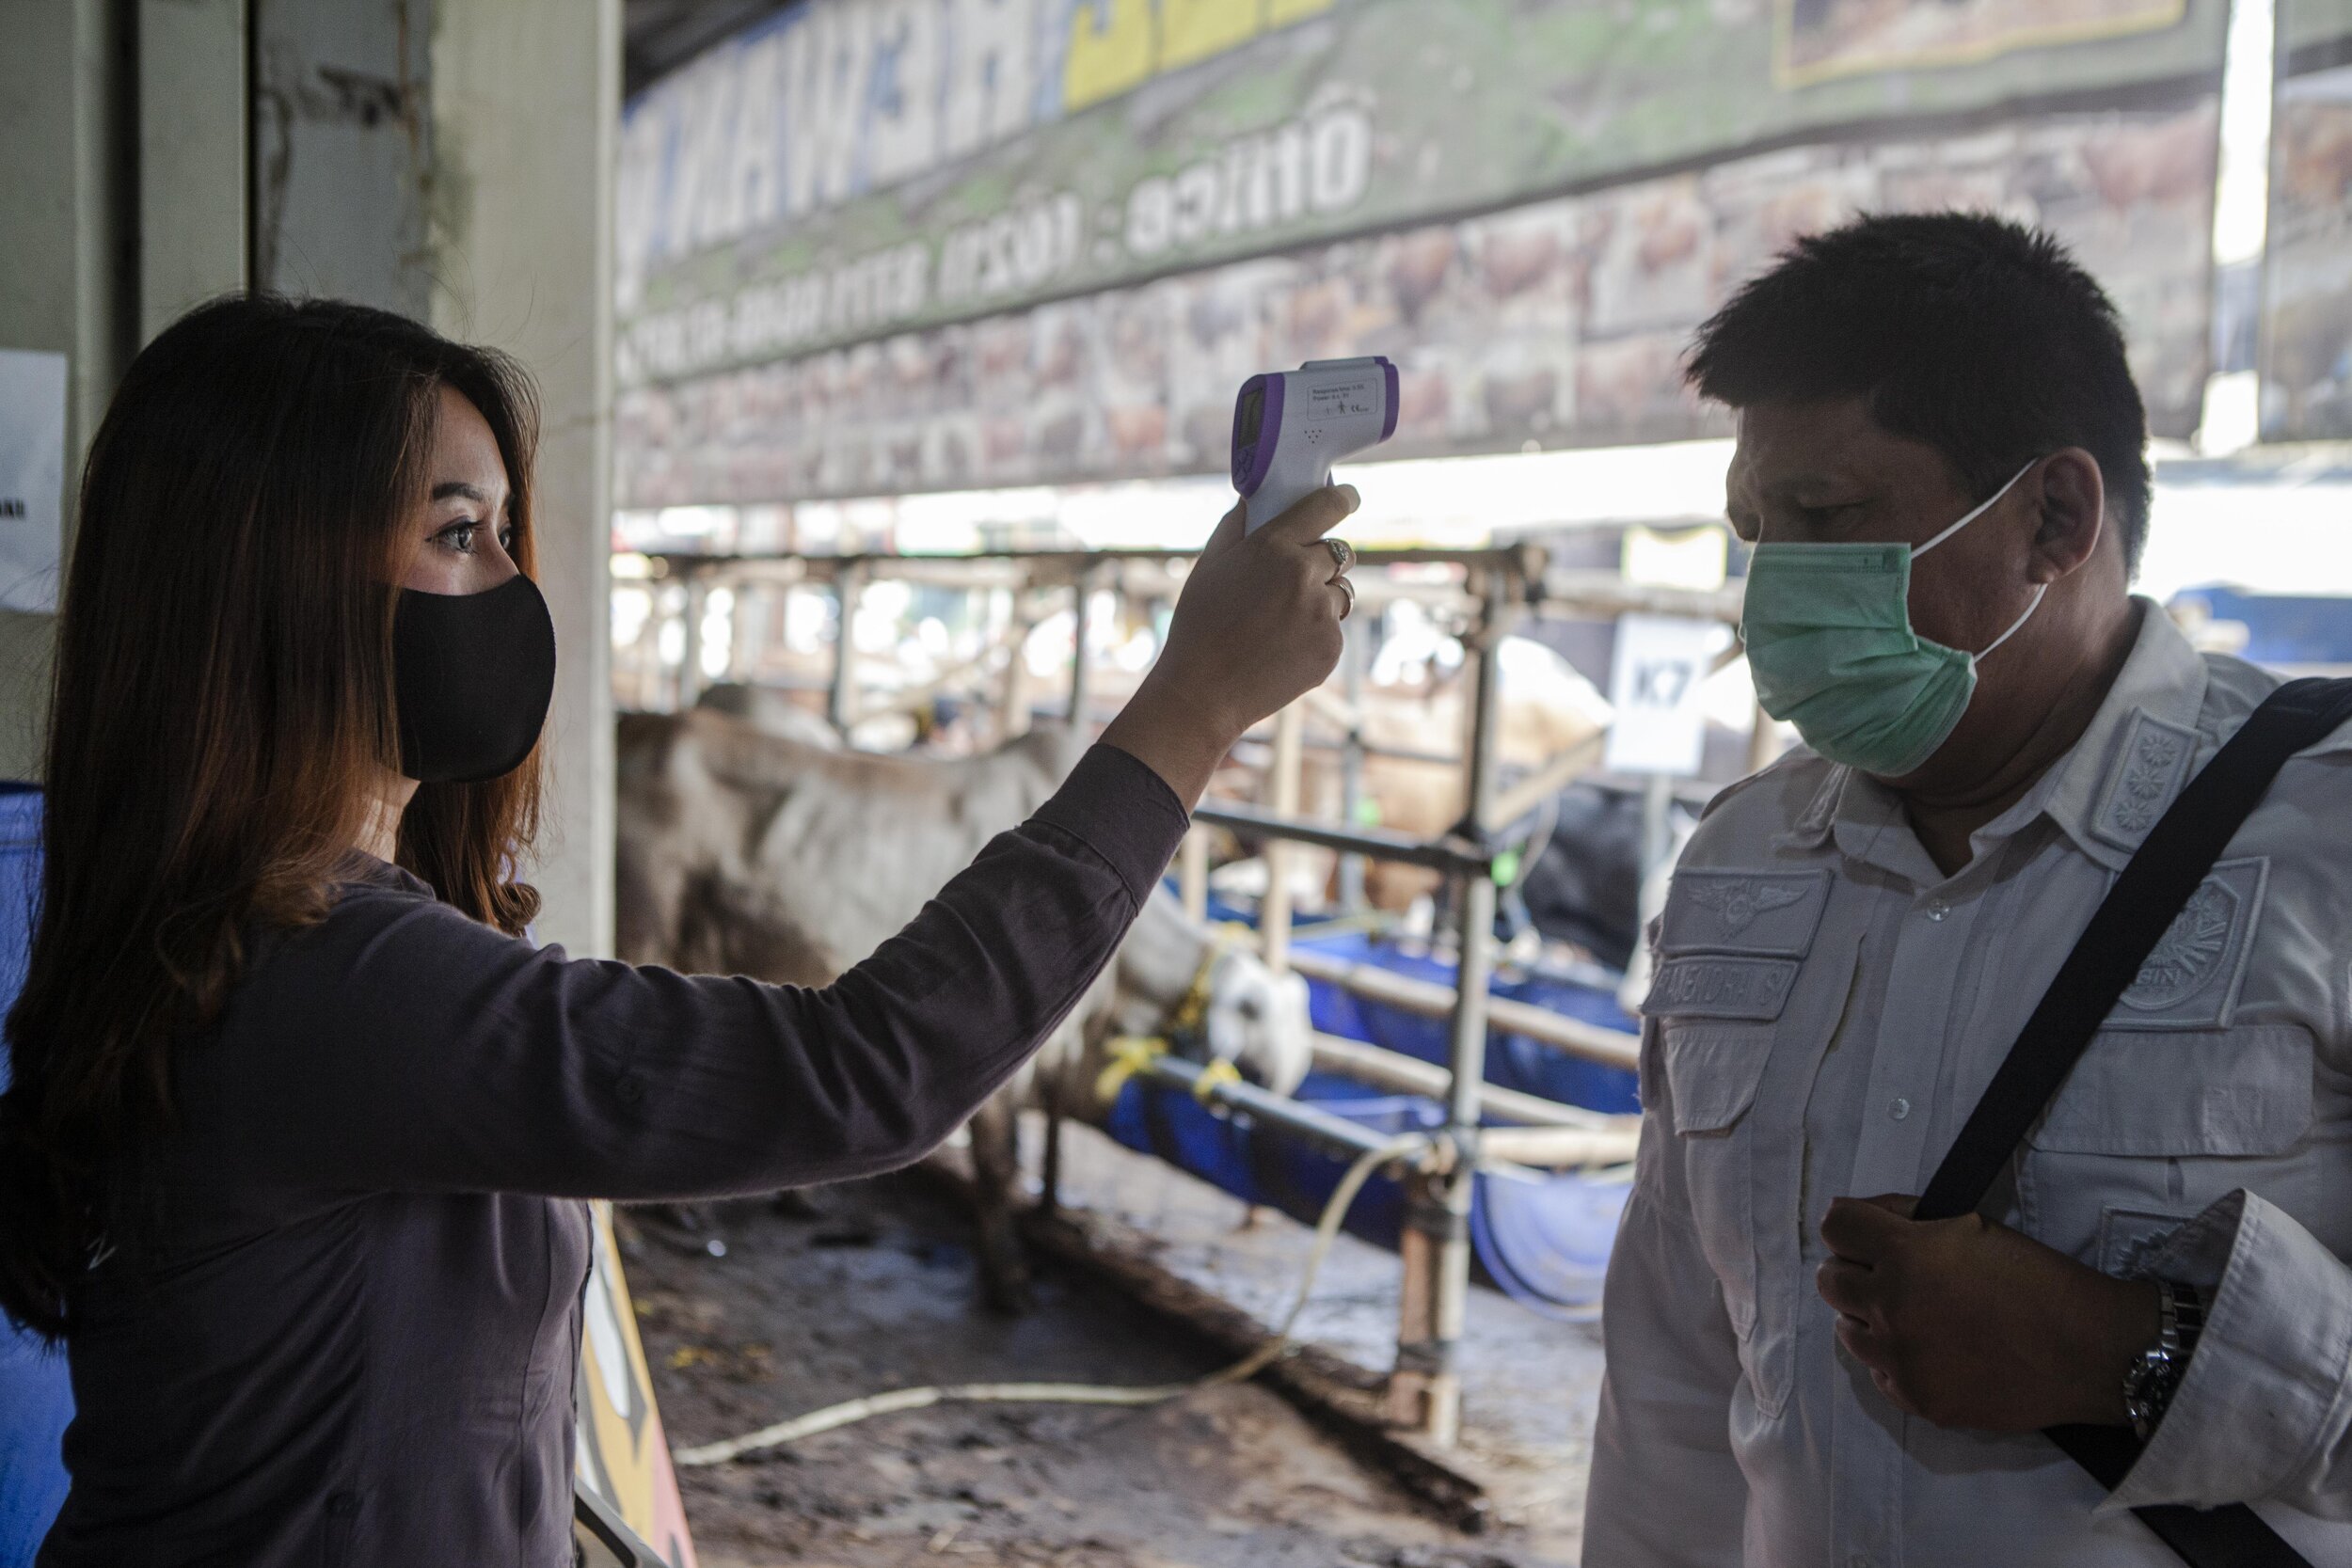  A sales clerk checks a visitor’s body temperature using a thermal gun at a livestock market. Photo by Agoes Rudianto. 